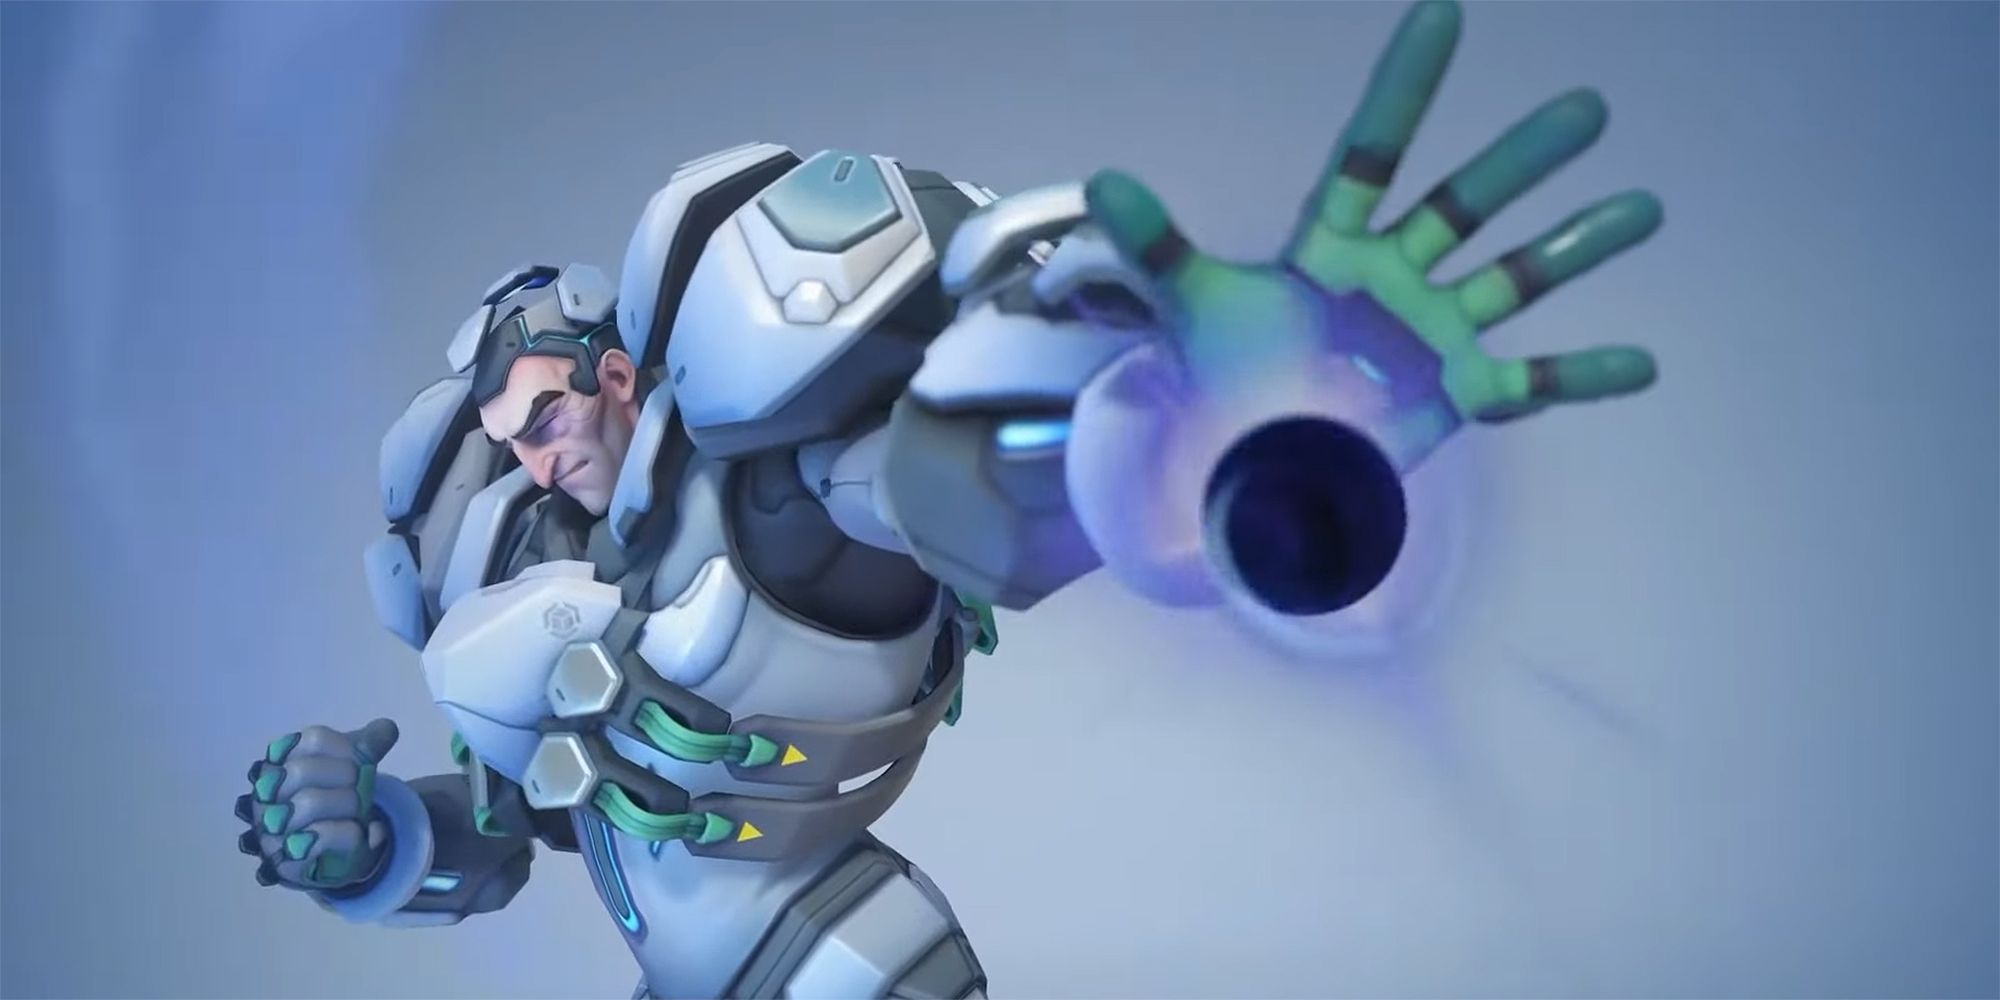 sigma absorbing projectiles with kinetic grasp in highlight intro